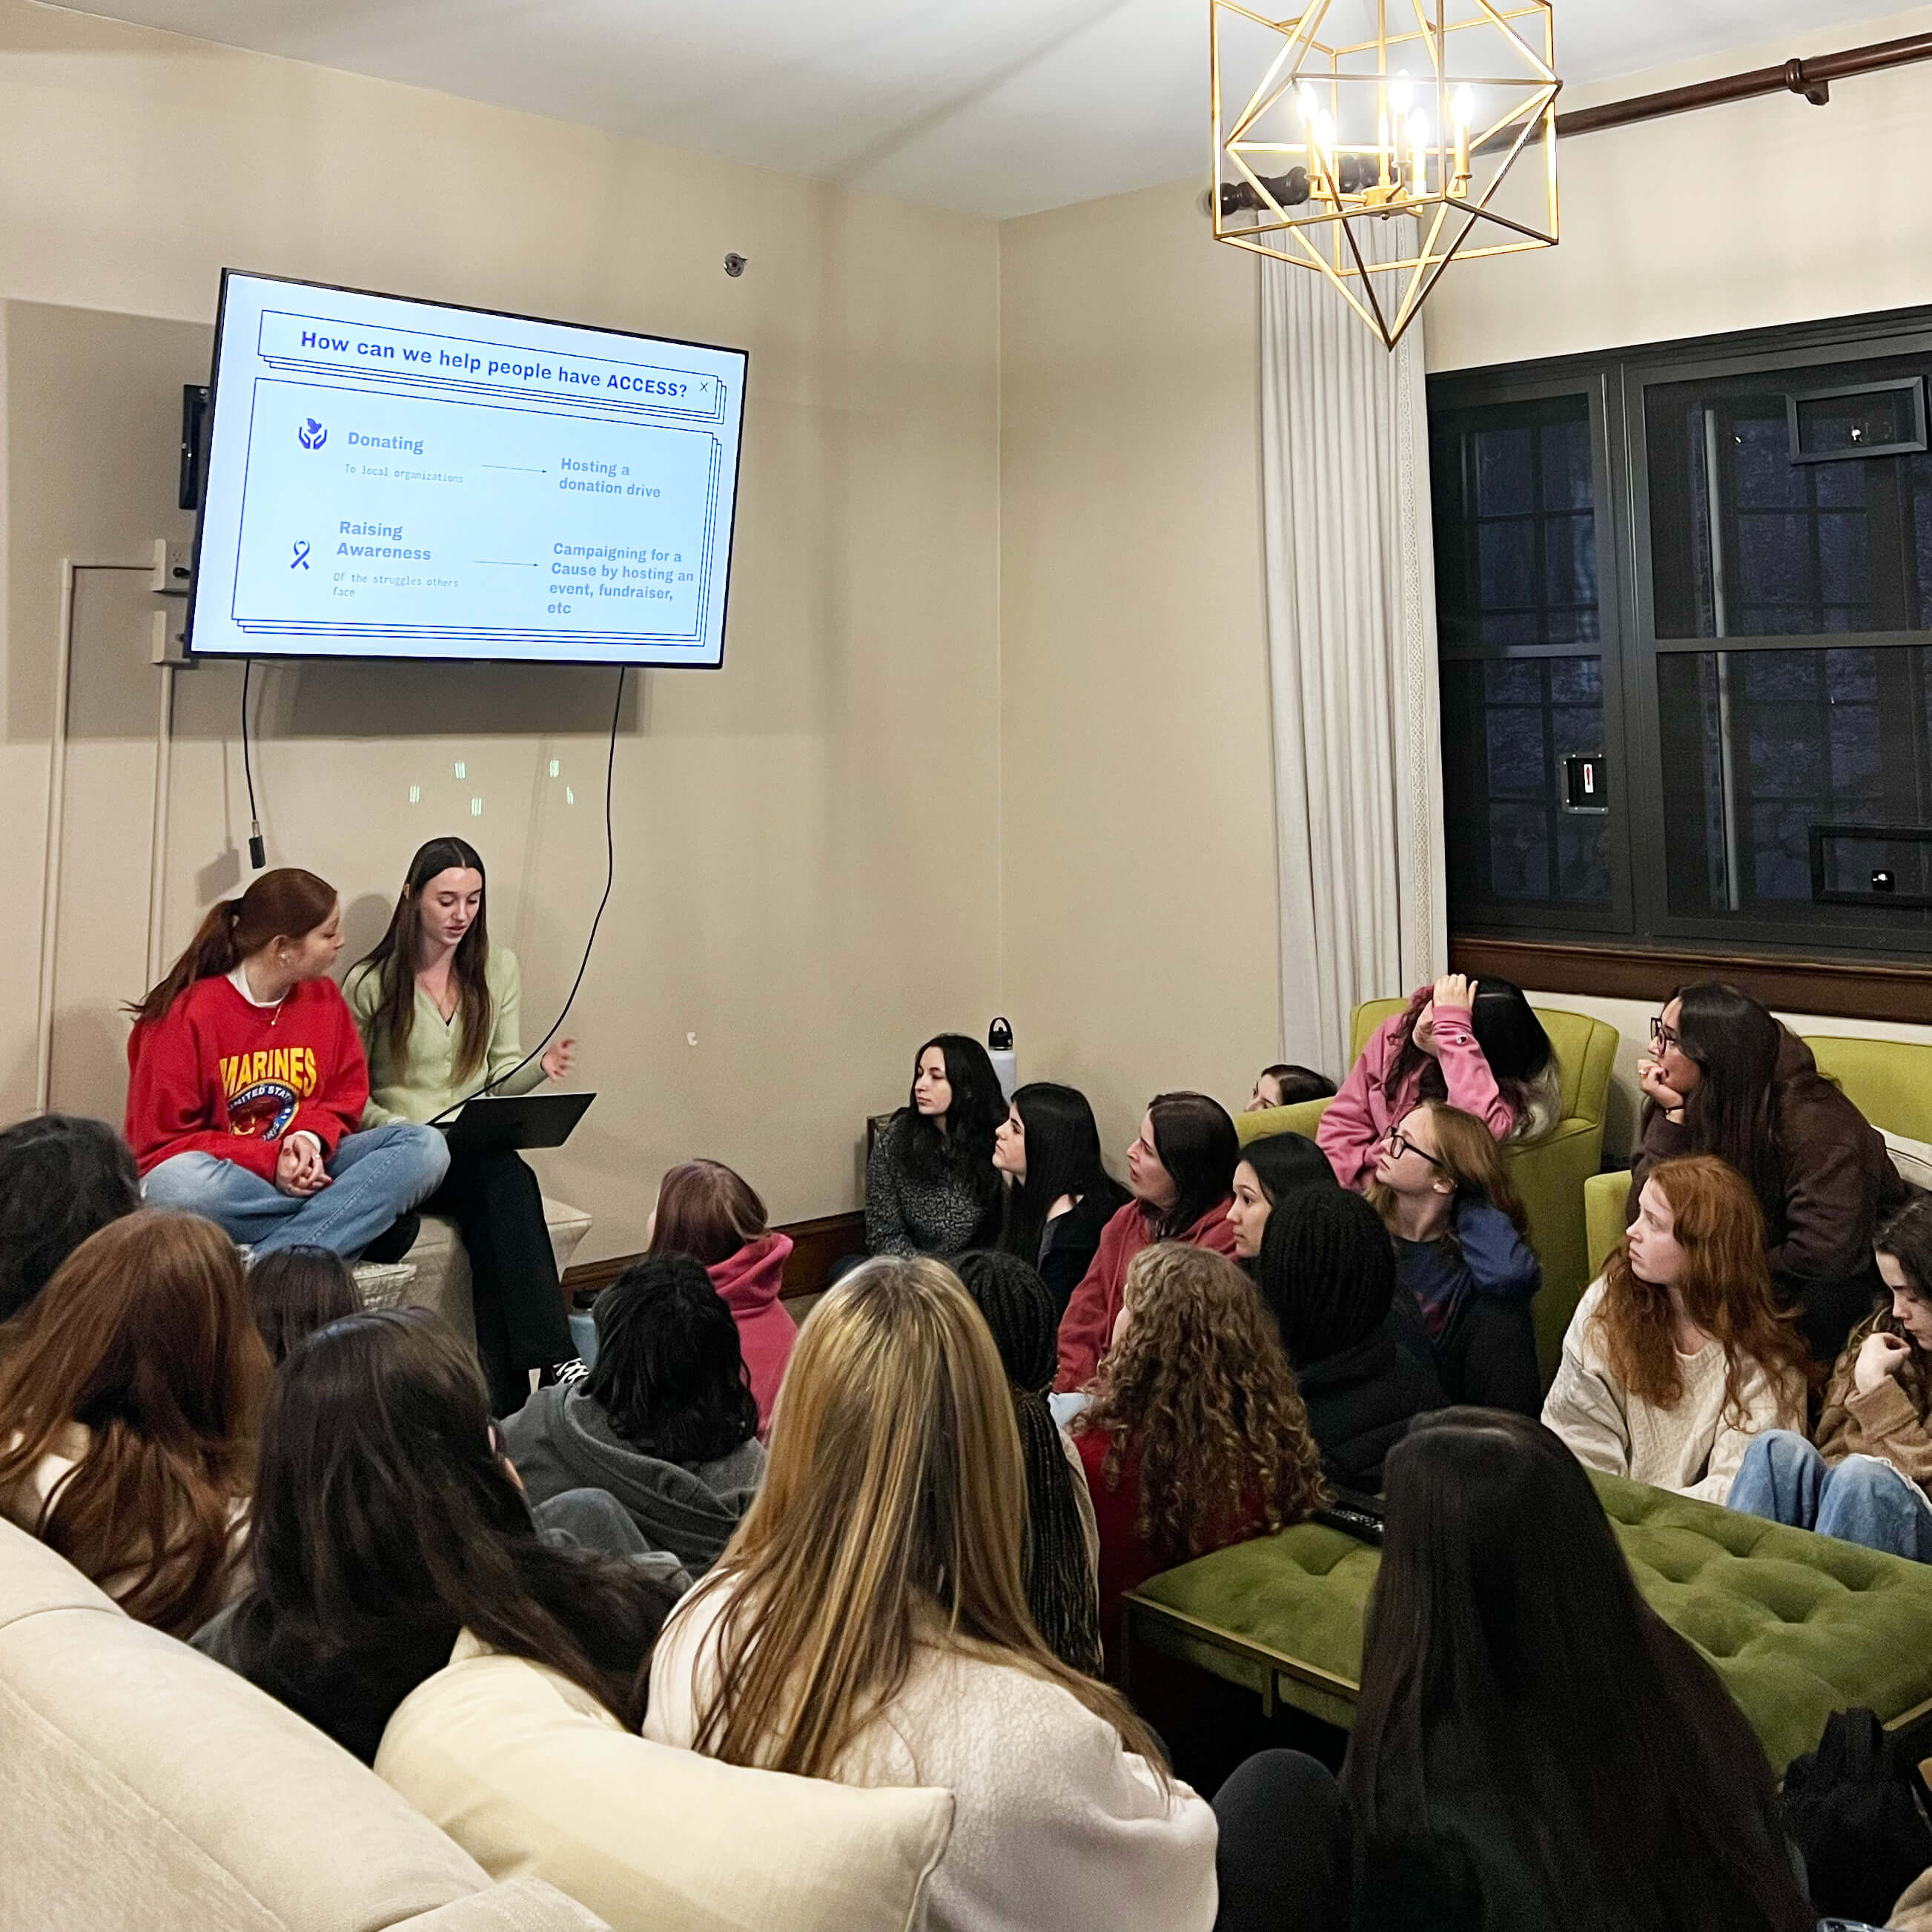 Kappa Delta sisters lead a brainstorming session with girl scouts who sit around them on the floor and on couches.